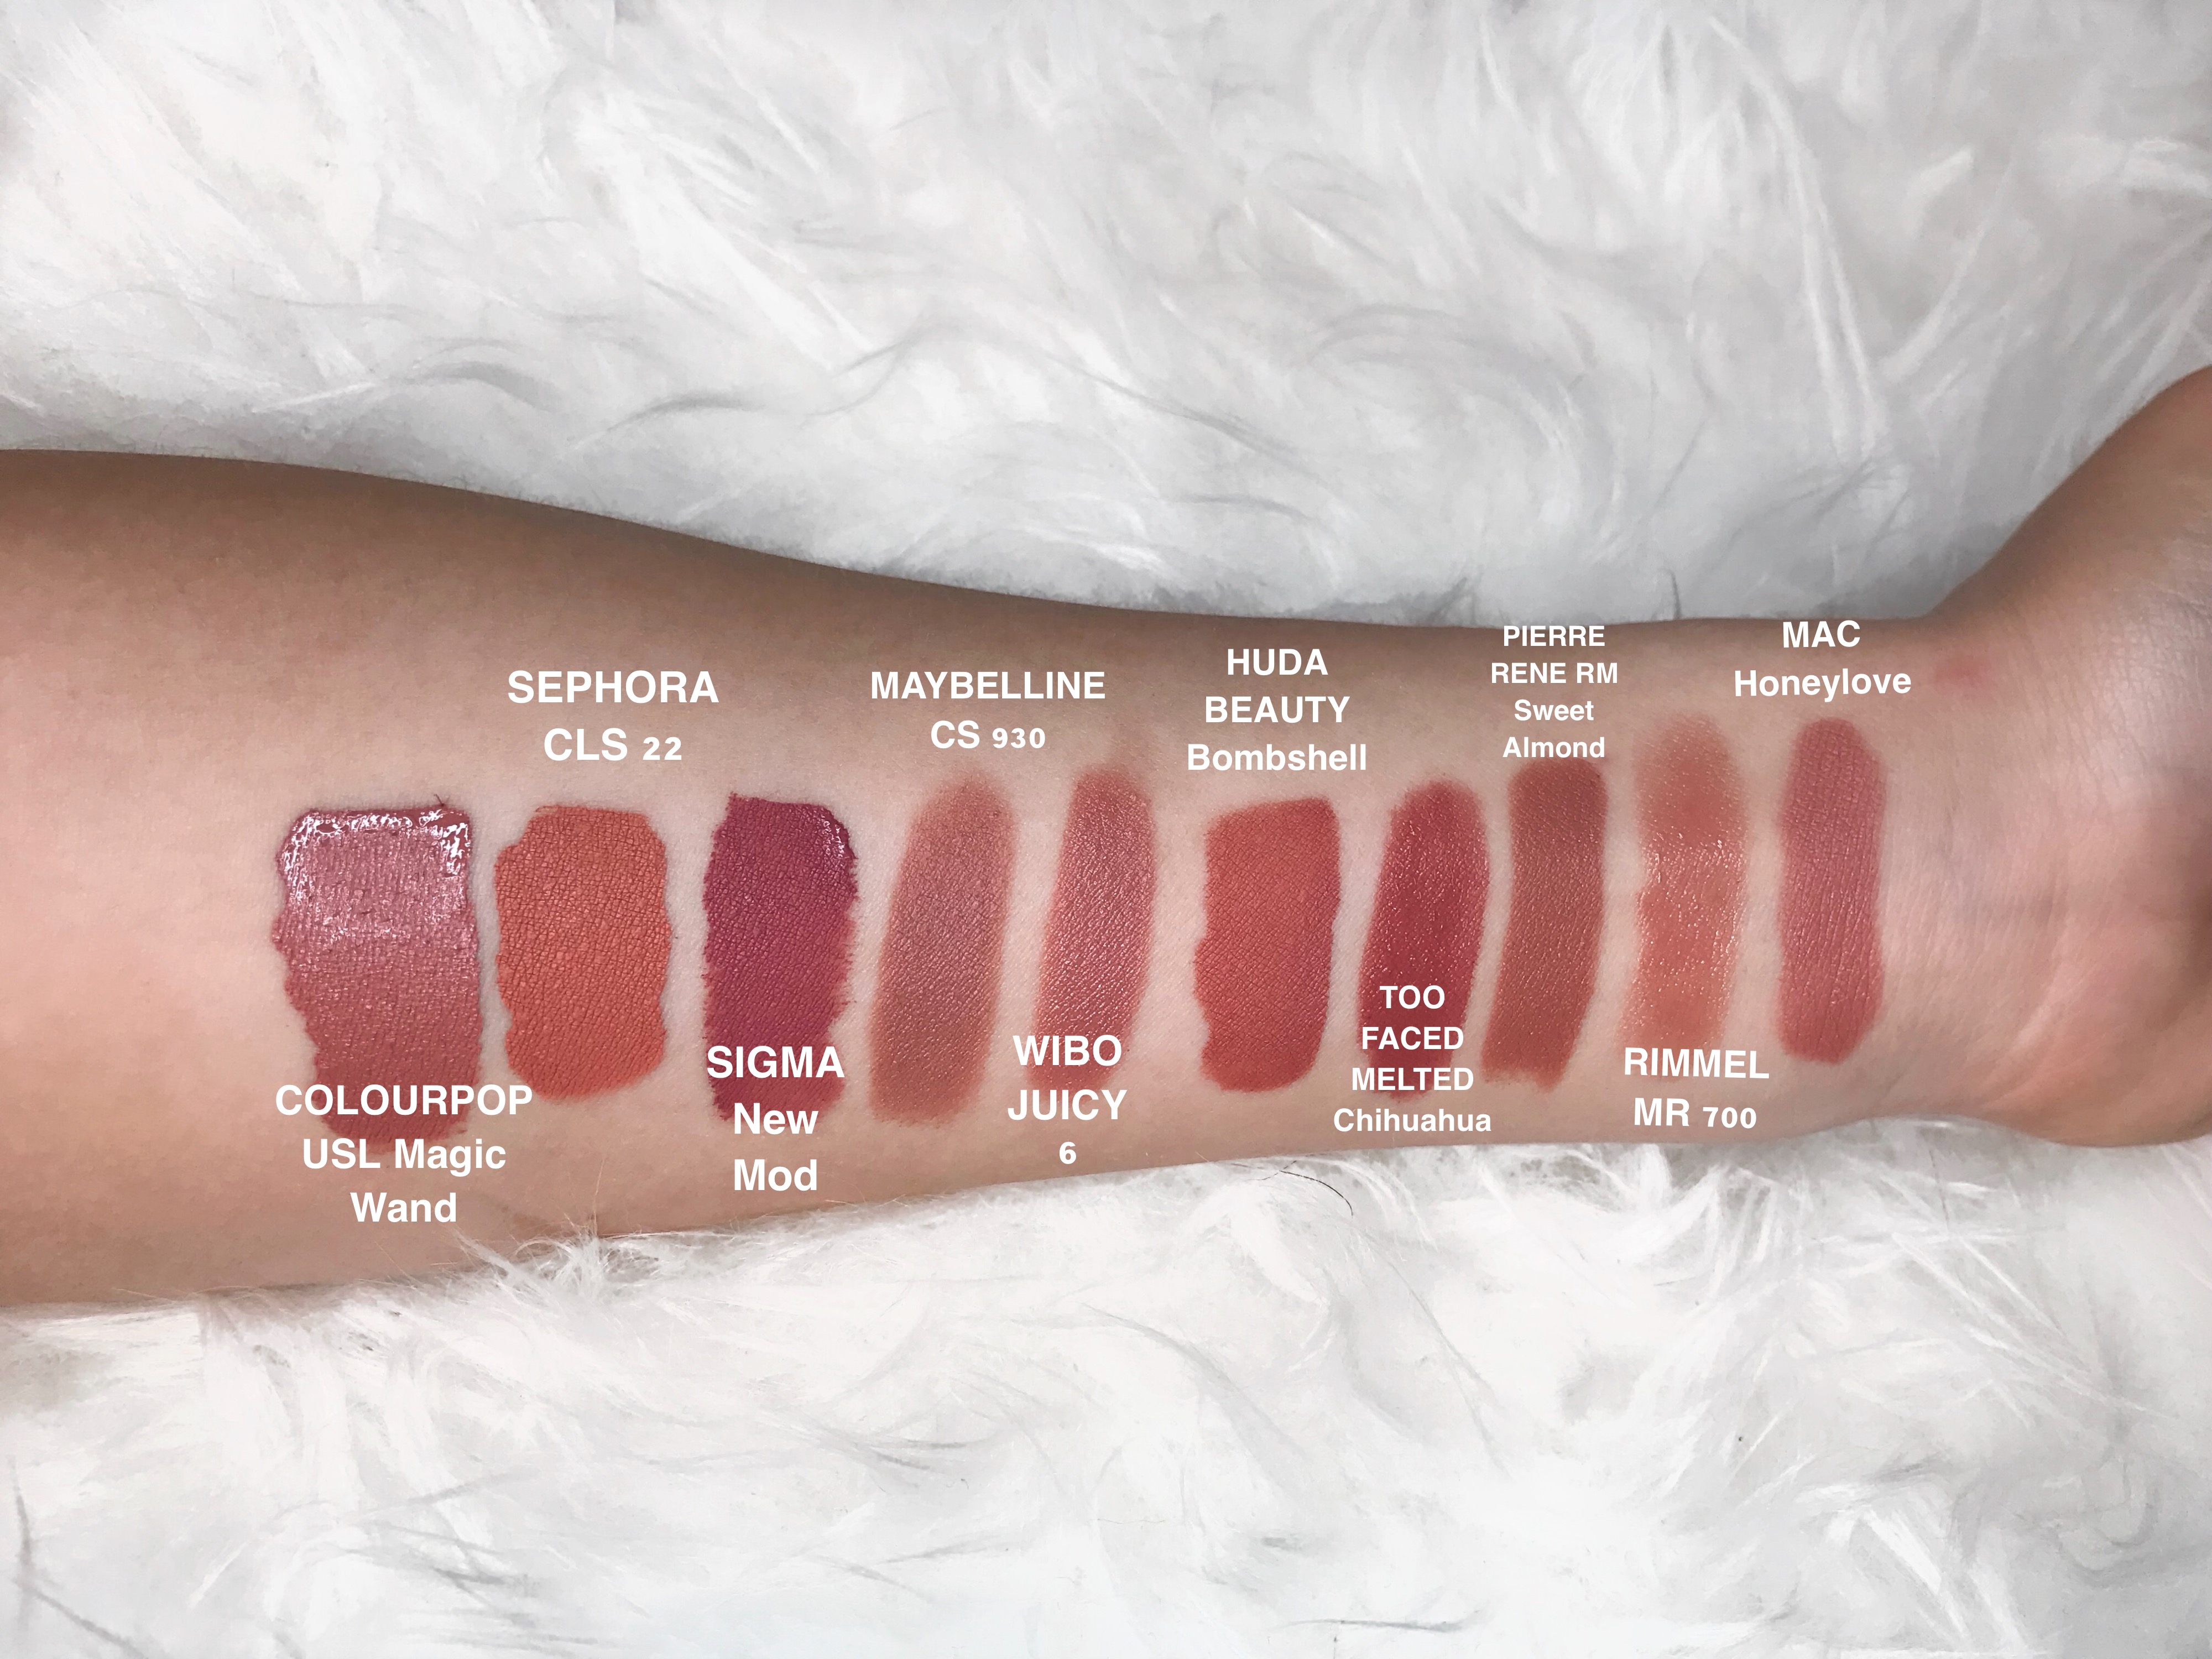 nude lipsticks swatches colourpop magic wand sephora cream lip stain 22 sigma new mod maybelline color sensational 930 wibo juicy color 6 huda beauty bombshell too faced melted chihuahua pierre rene sweet almond rimmel moisture renew 700 mac honeylove